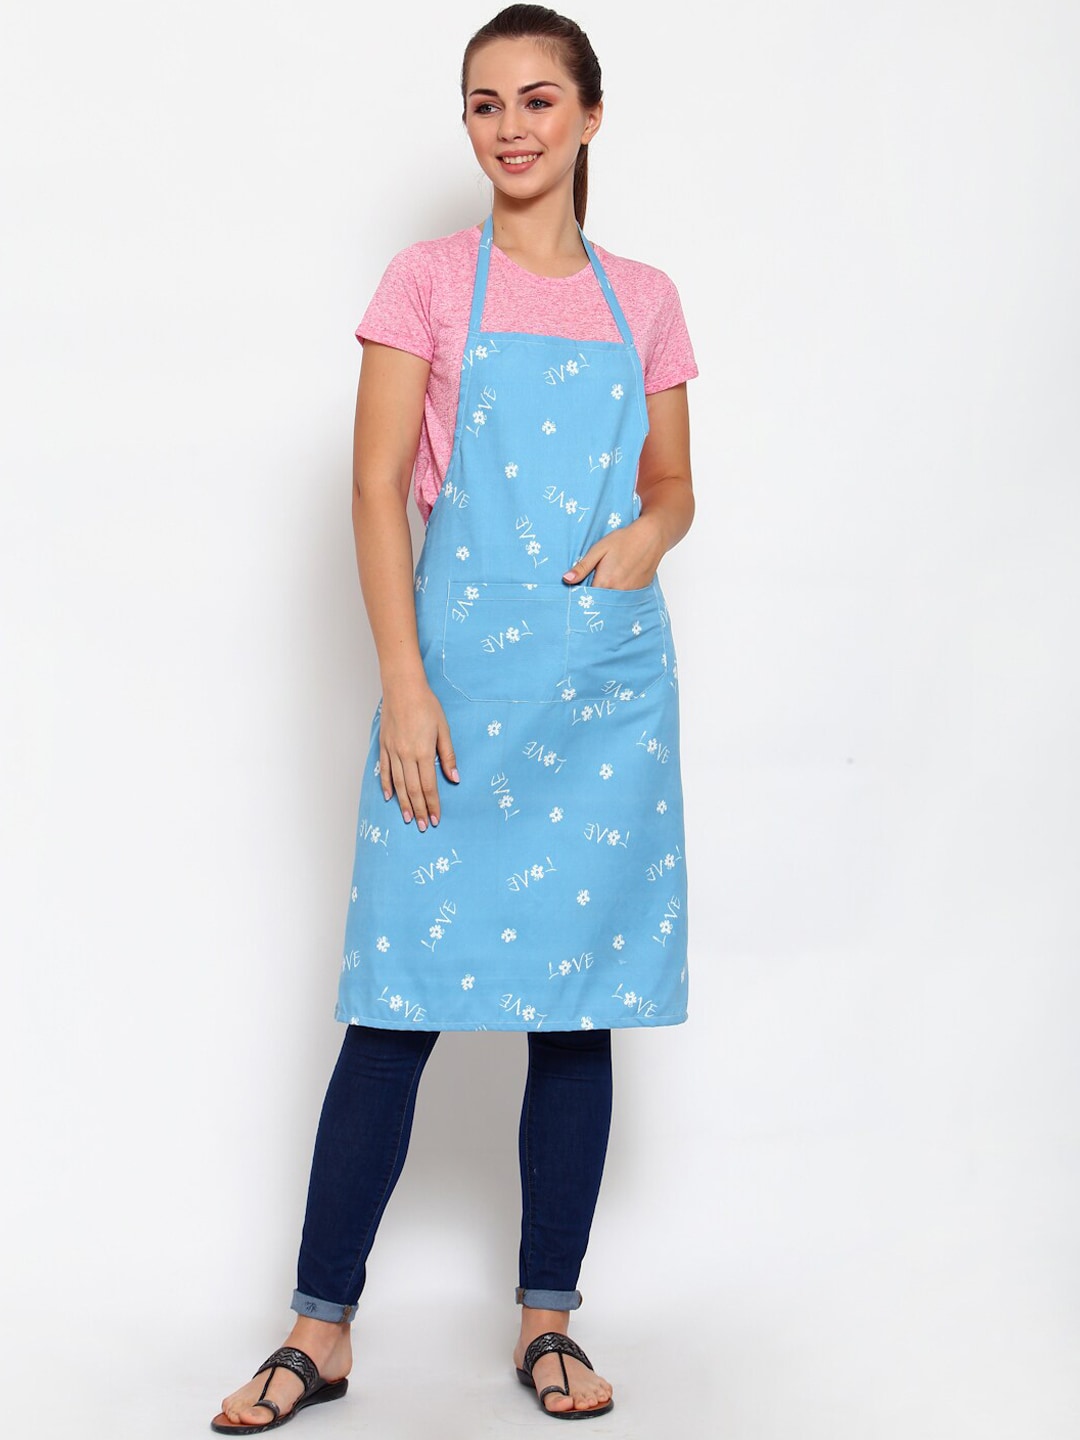 Arrabi Blue & White Floral TC Cotton Blend Apron with 2 Patch Pockets Price in India